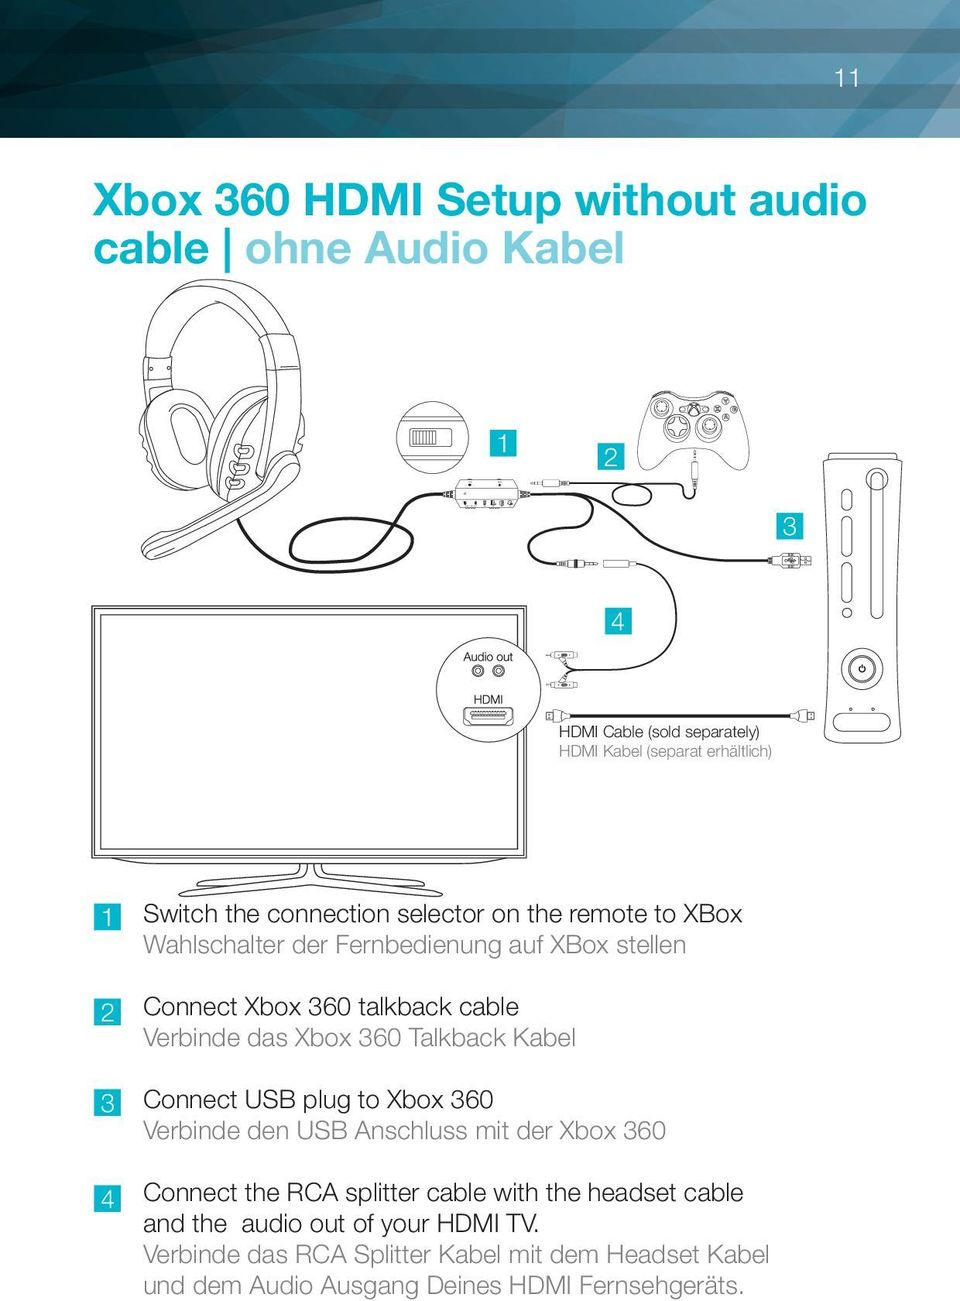 Verbinde das Xbox 60 Talkback Kabel Connect USB plug to Xbox 60 Verbinde den USB Anschluss mit der Xbox 60 Connect the RCA splitter cable with the